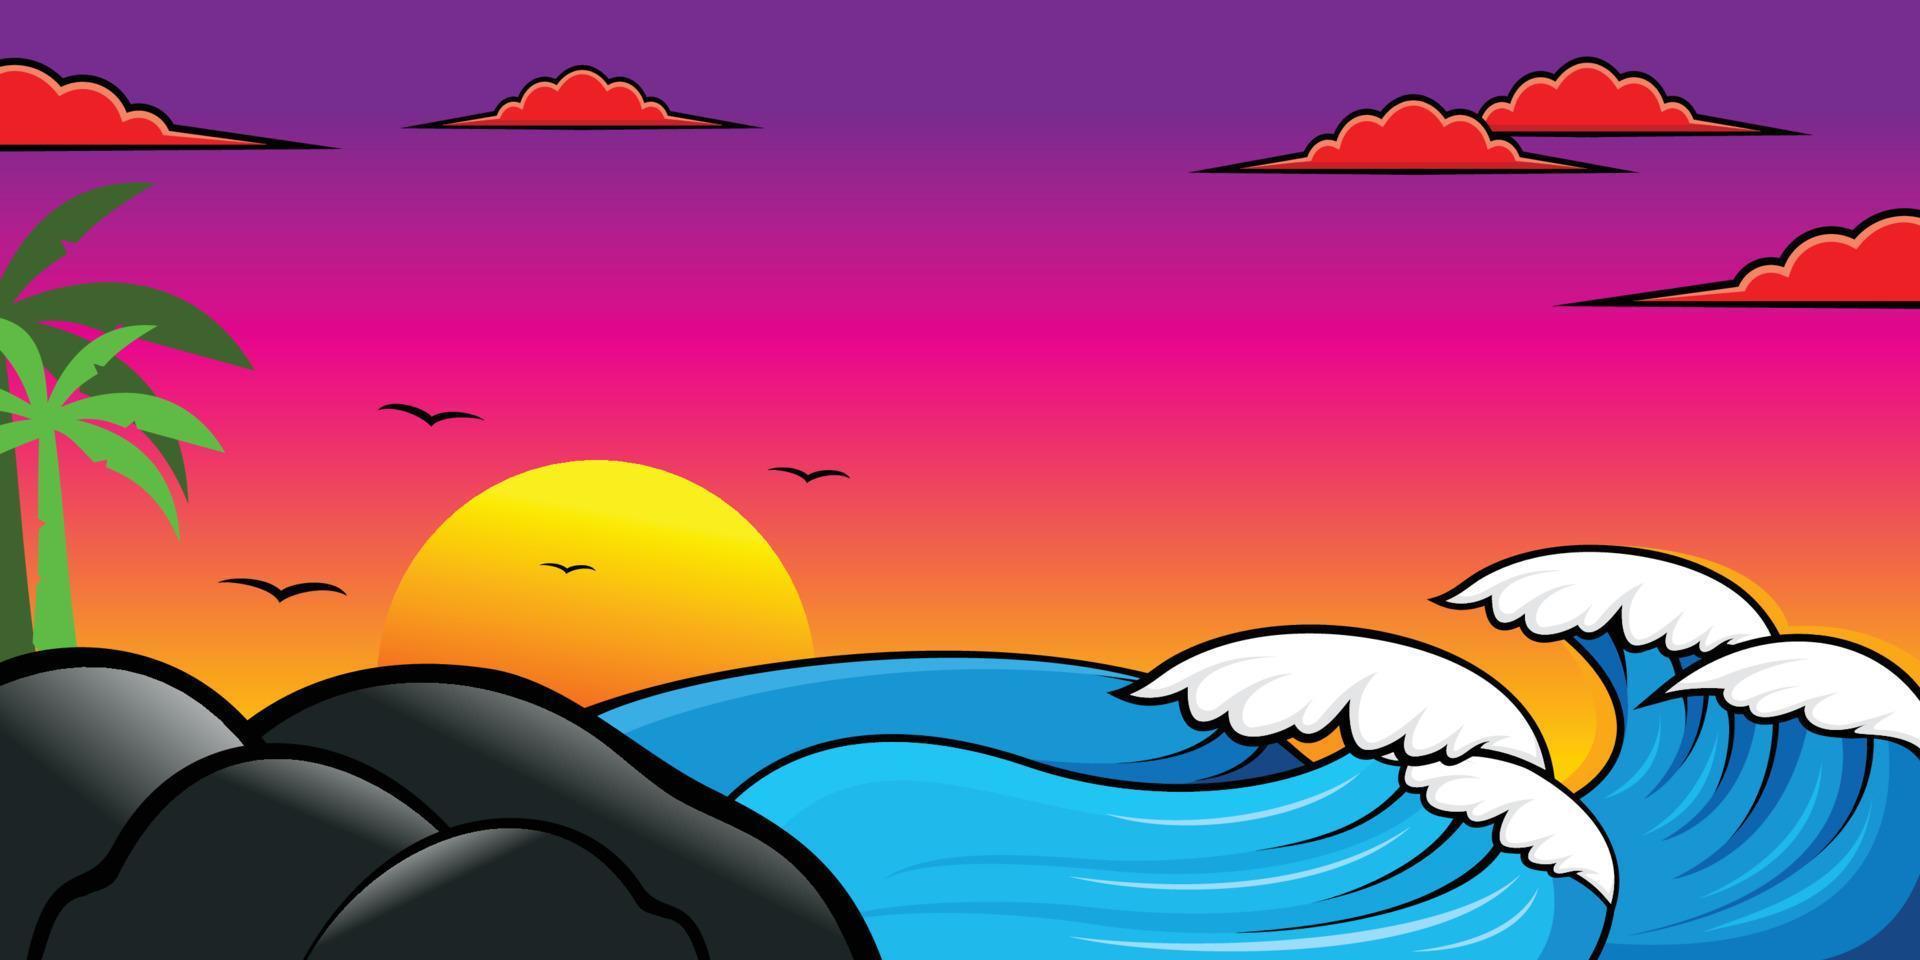 Vector design and illustration of waves and beach atmosphere